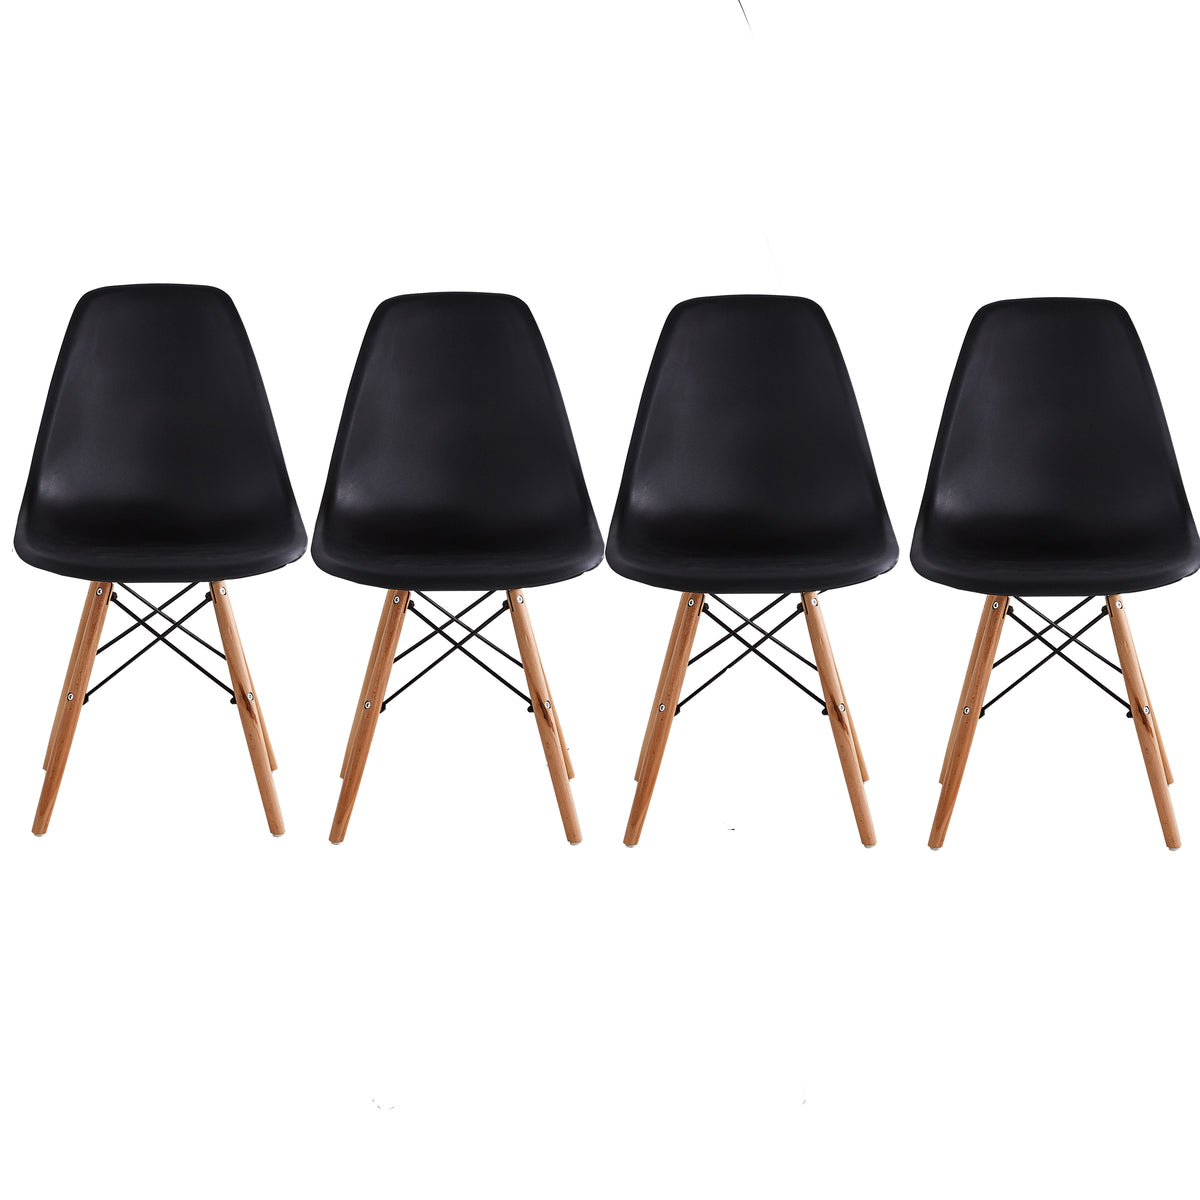 Eames Chair CR-PP623 4-in-1 multi-functional design furniture1